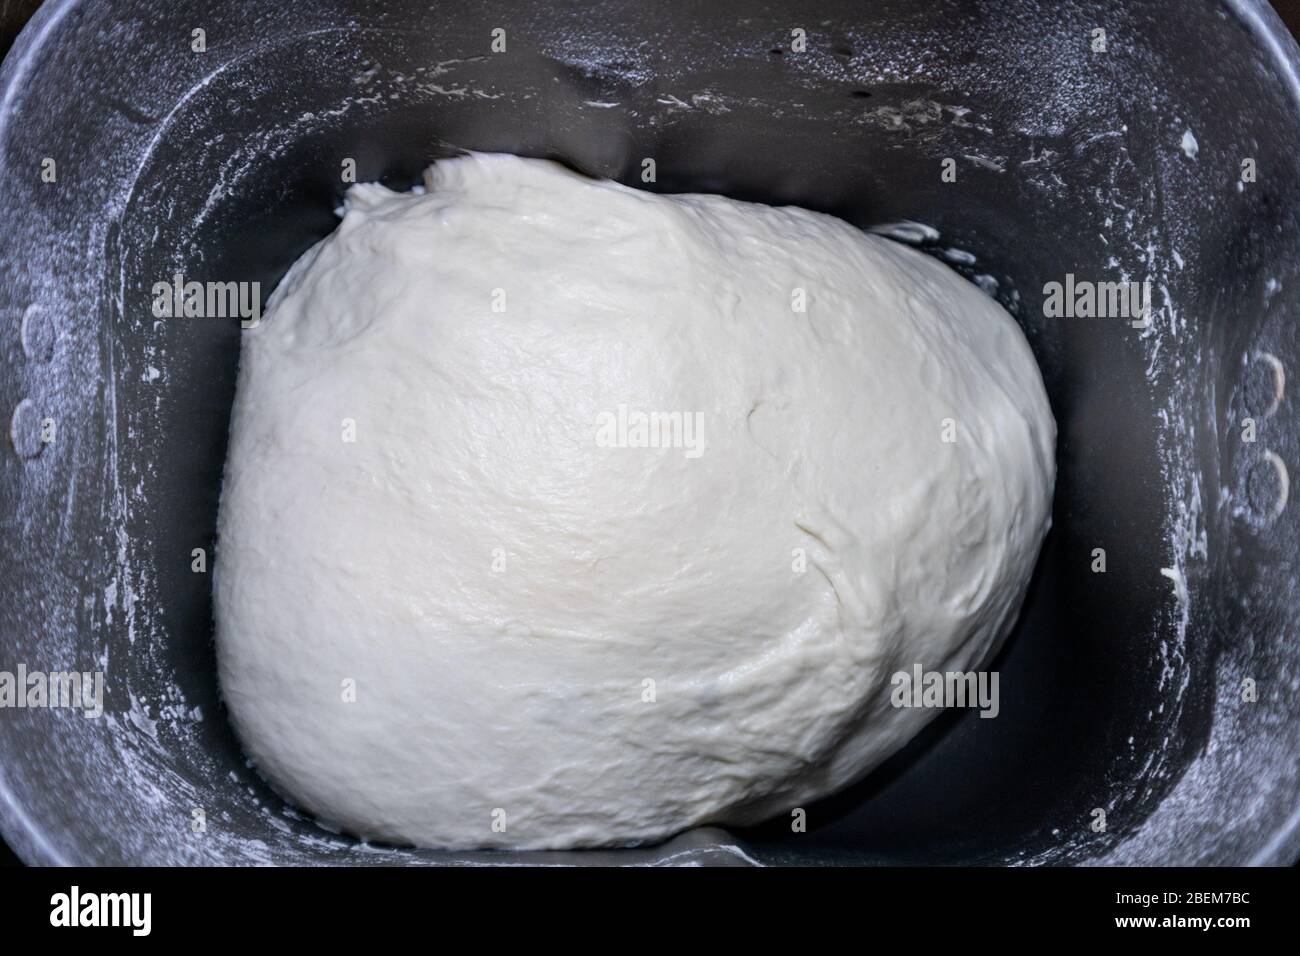 https://c8.alamy.com/comp/2BEM7BC/bread-dough-in-bread-maker-machine-dispenser-just-mixed-ready-to-rise-fresh-white-home-made-bread-pizza-pastry-duff-cooking-process-close-up-on-dark-2BEM7BC.jpg